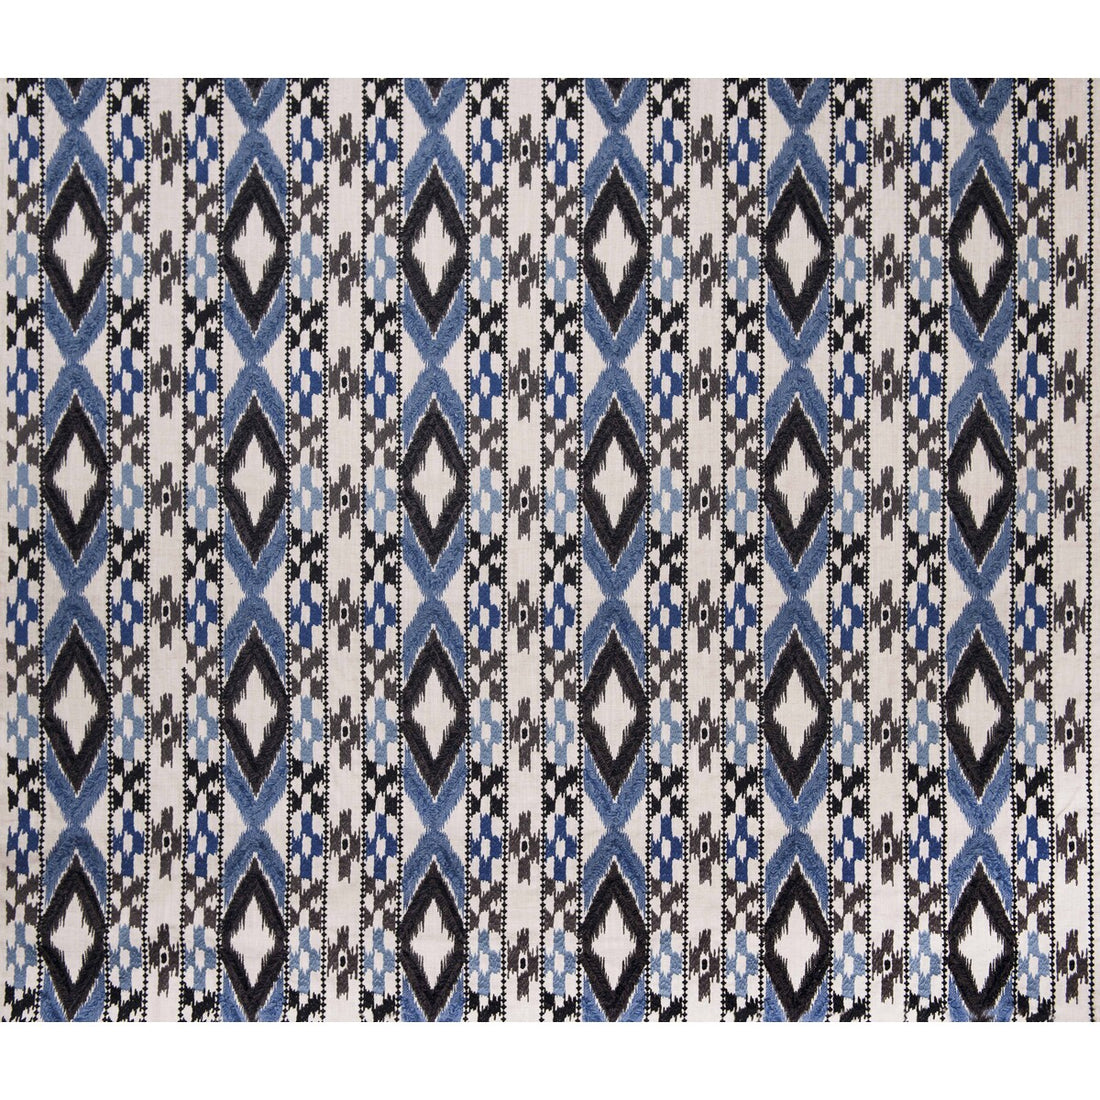 Queen fabric in azul/black color - pattern GDT5403.1.0 - by Gaston y Daniela in the Gaston Africalia collection